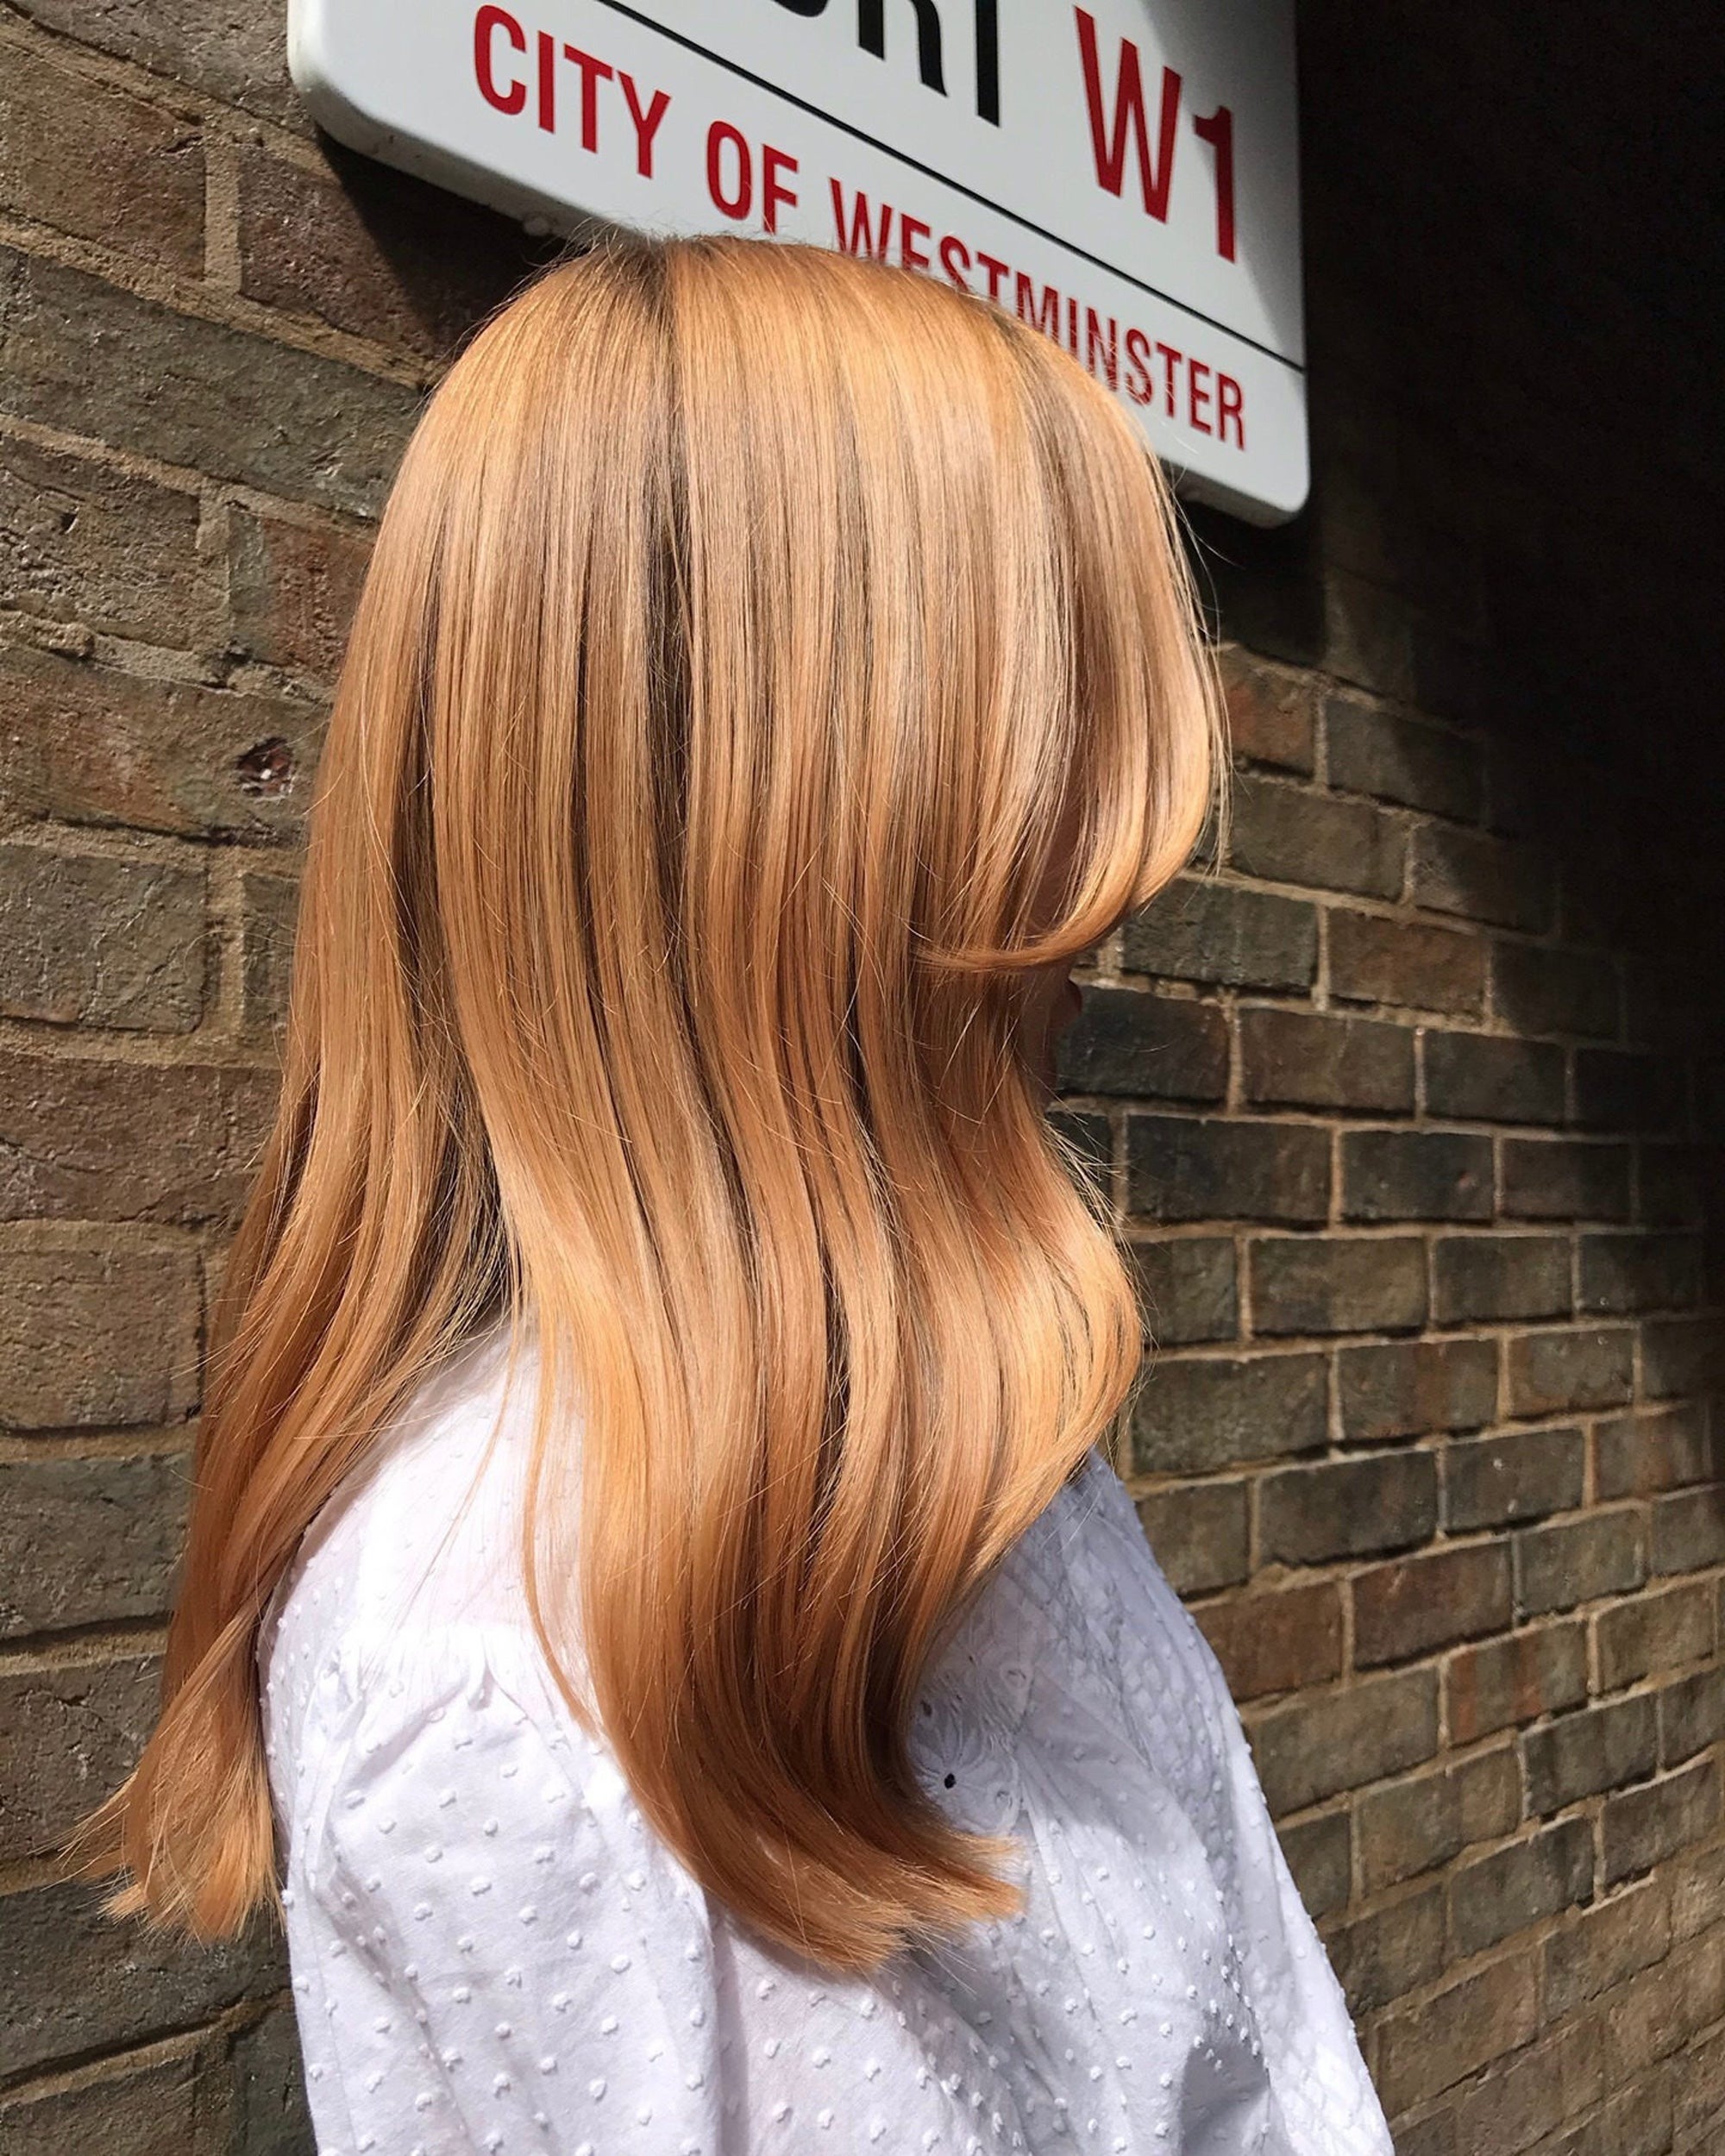 The Copper Hair Trend Is Officially Heating Up